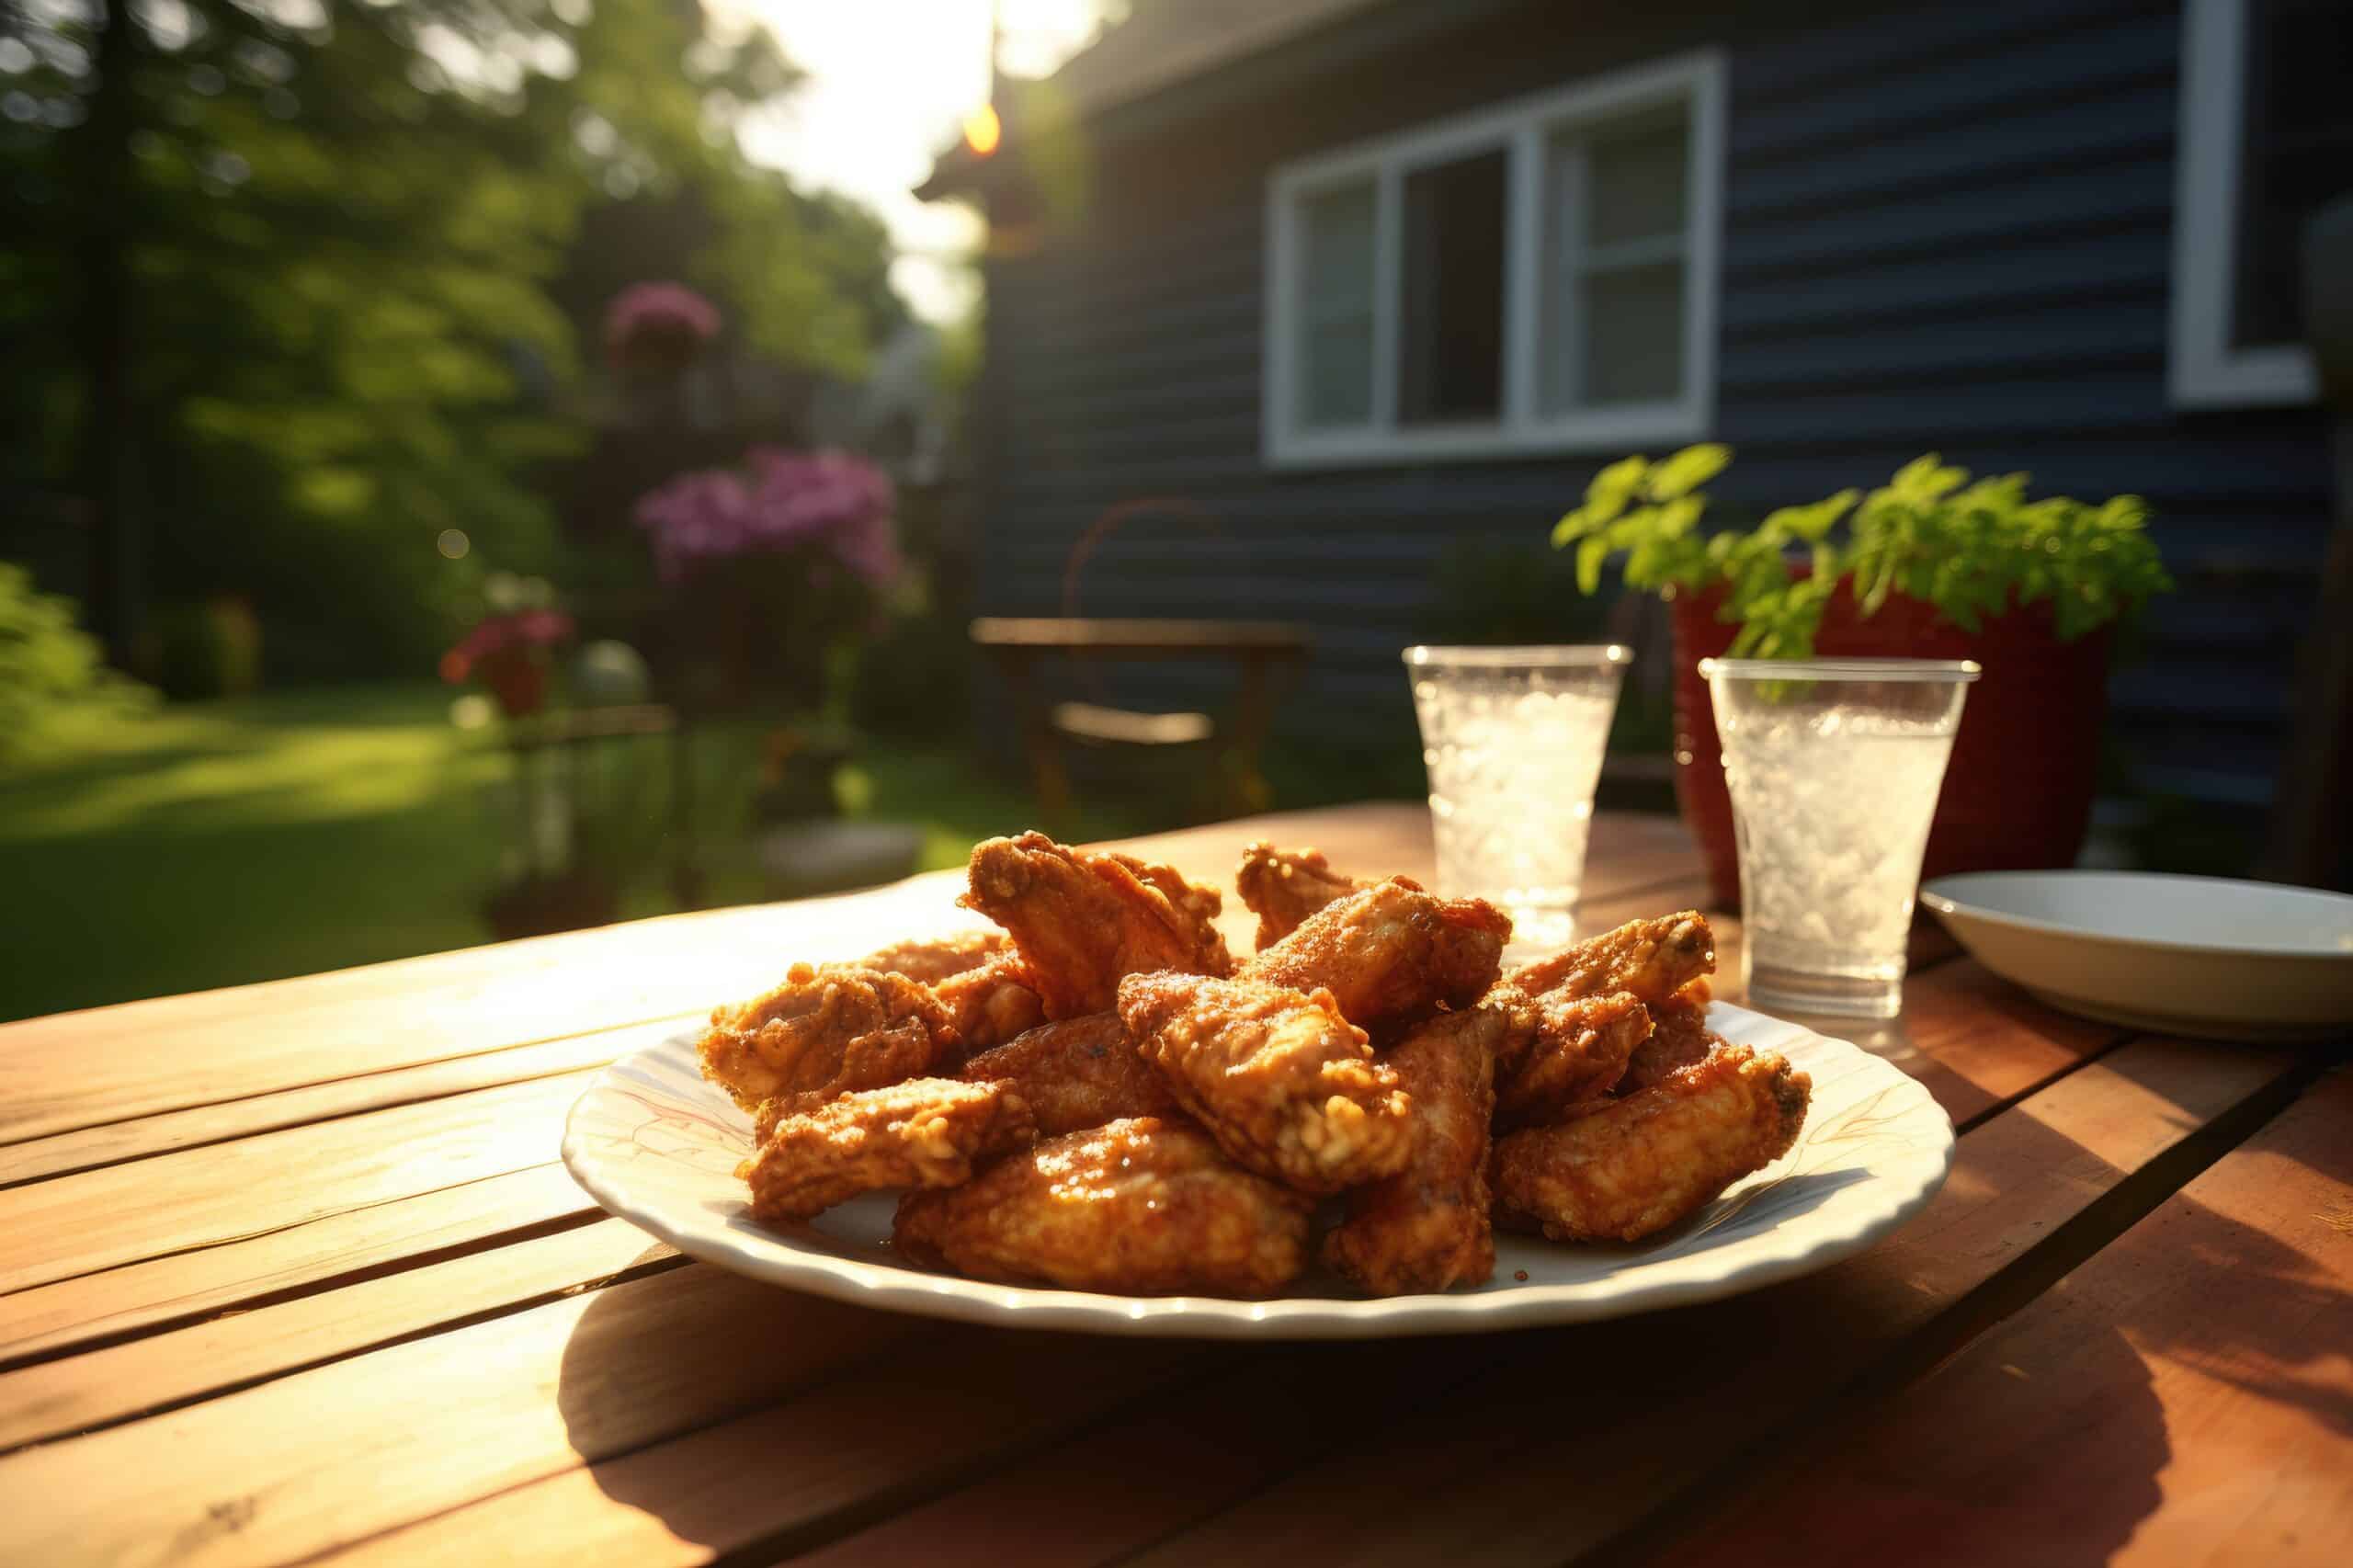 www.appr.com : How To Grill Chicken Wings On Gas Grill?